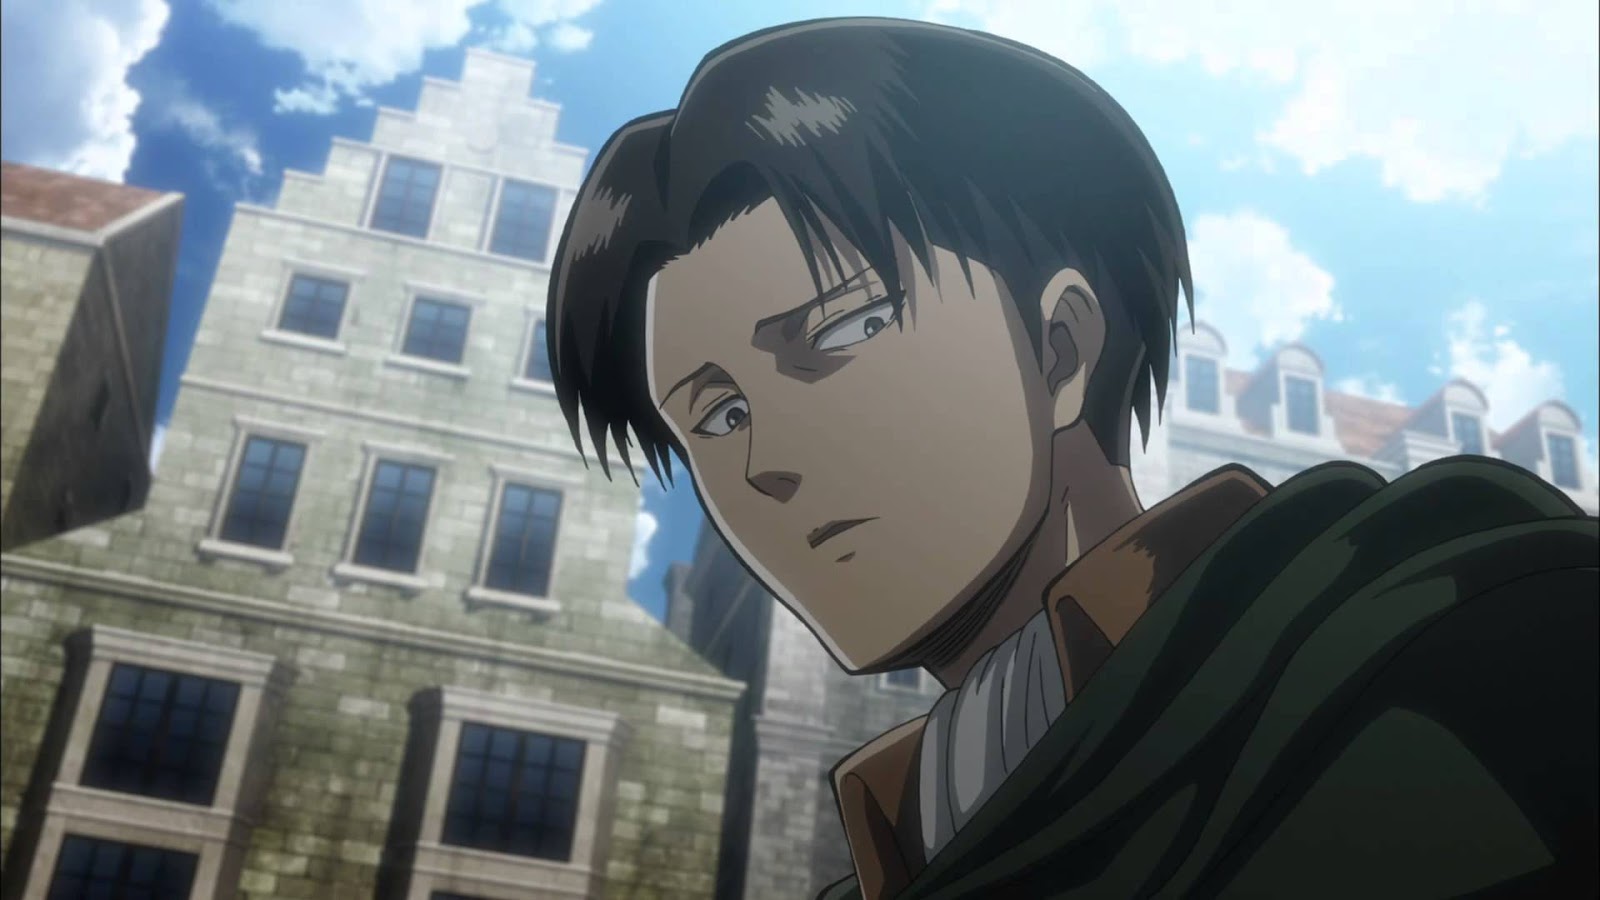 Top 5 Ranked Attack On Titan Characters With Brute Strength